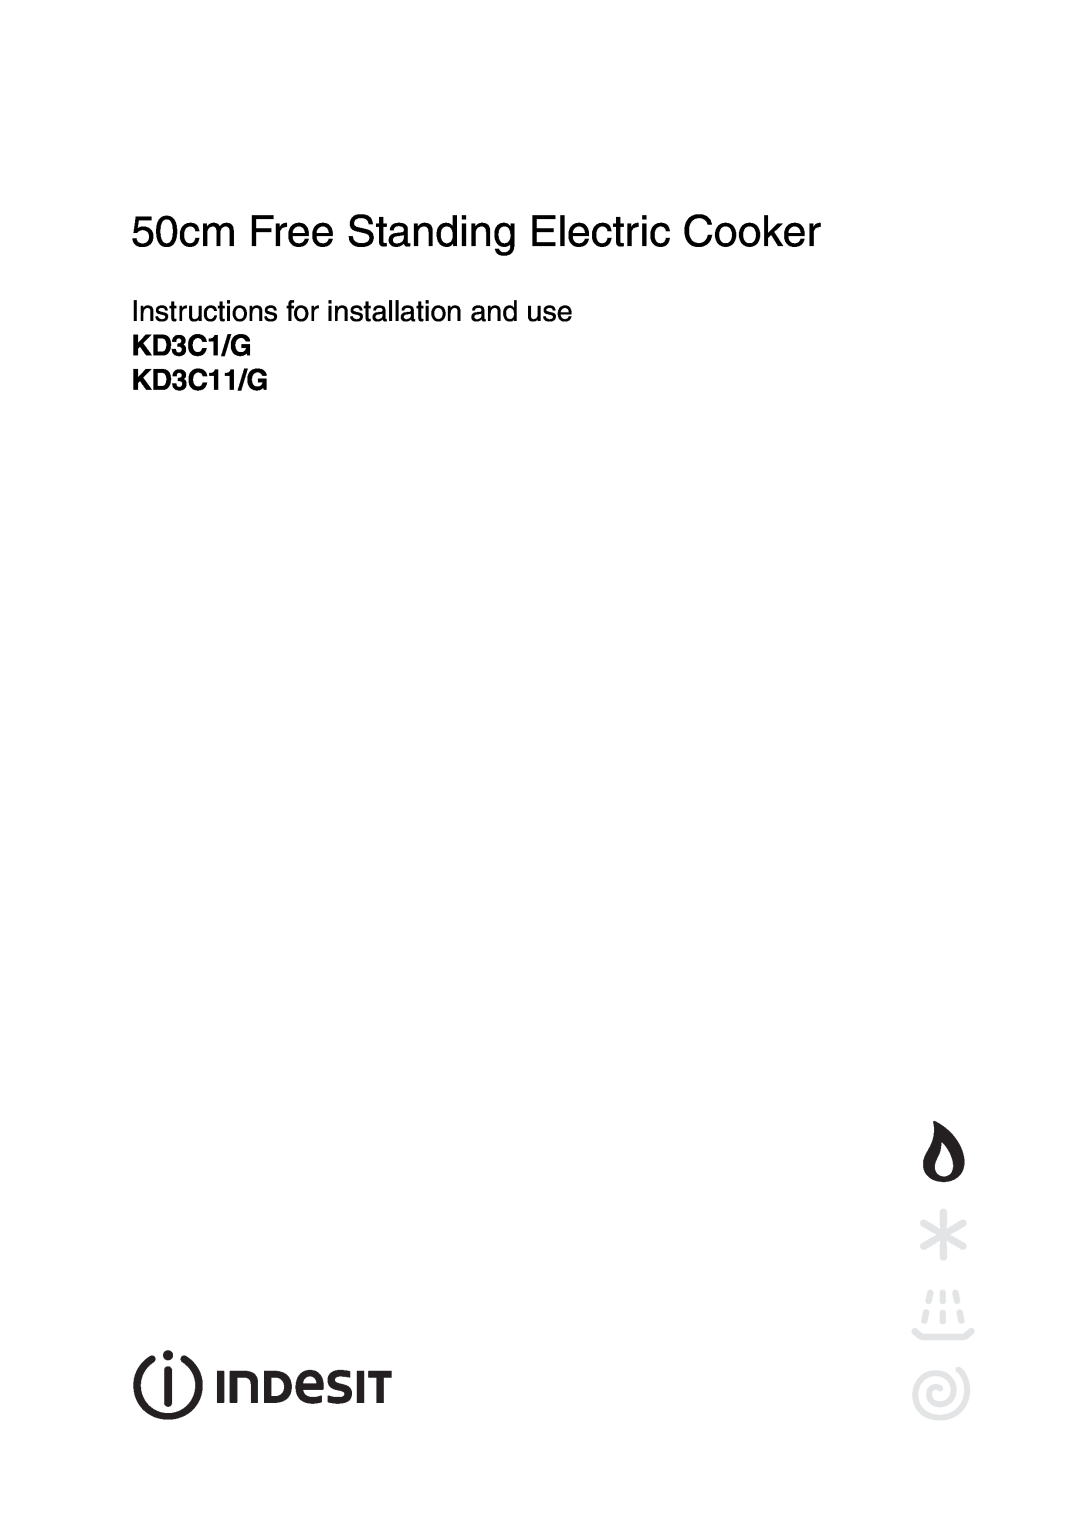 Indesit manual KD3C1/G KD3C11/G, 50cm Free Standing Electric Cooker, Instructions for installation and use 